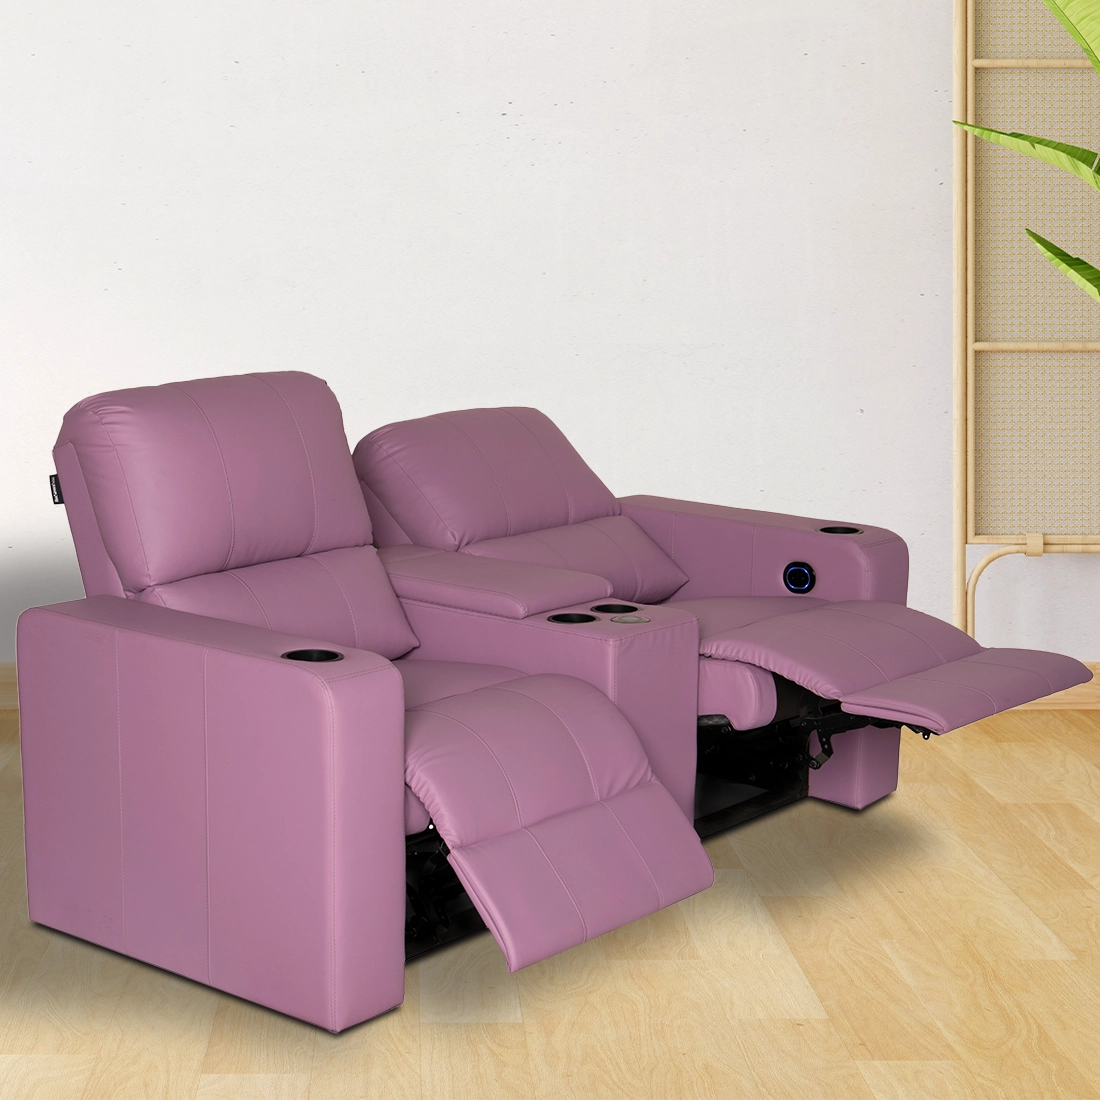 Home Theater Recliner Style-090